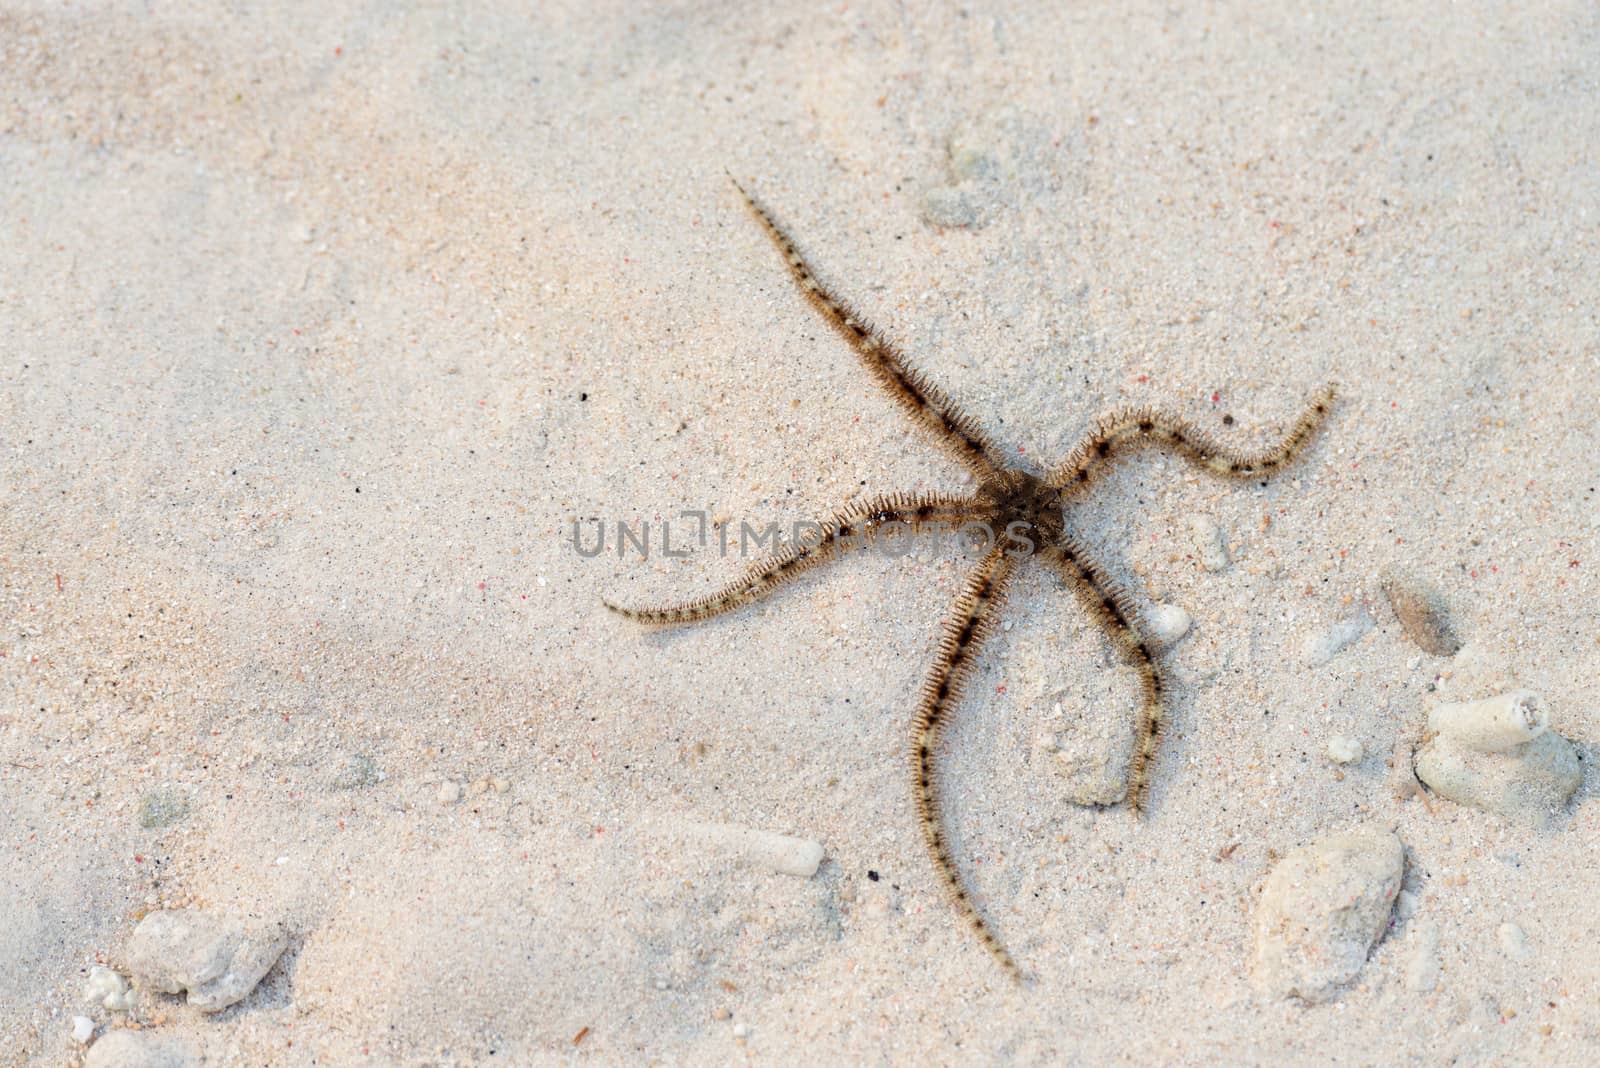 Brittle star or ophiuroids brown thin starfish on sand background